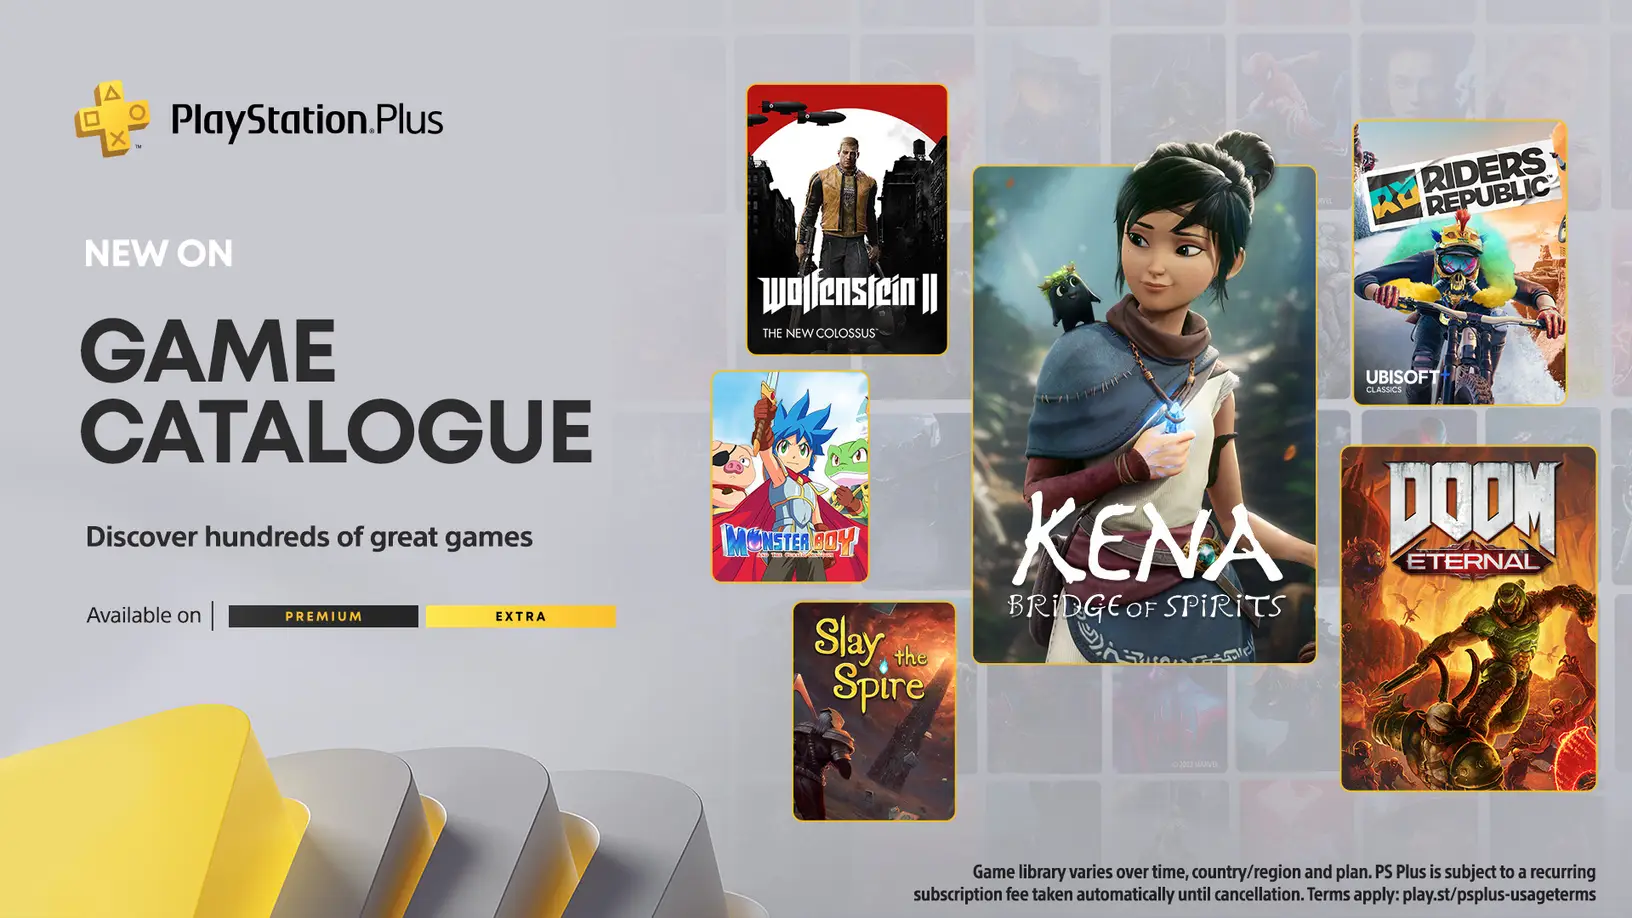 PlayStation Plus April 2022 game catalogue adds 16 new games including